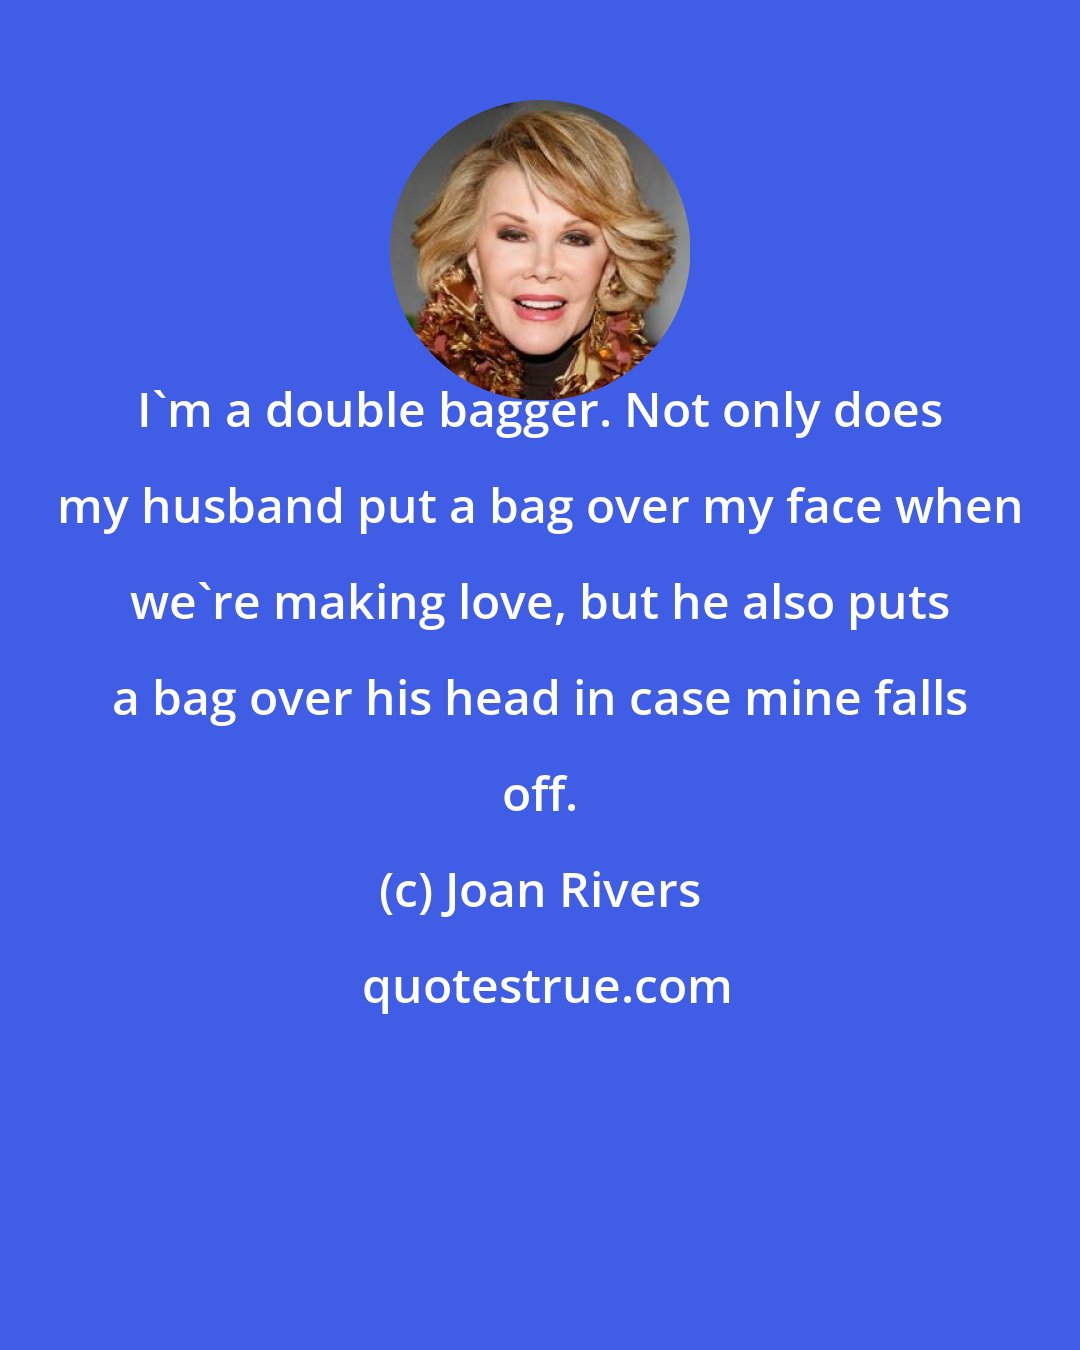 Joan Rivers: I'm a double bagger. Not only does my husband put a bag over my face when we're making love, but he also puts a bag over his head in case mine falls off.